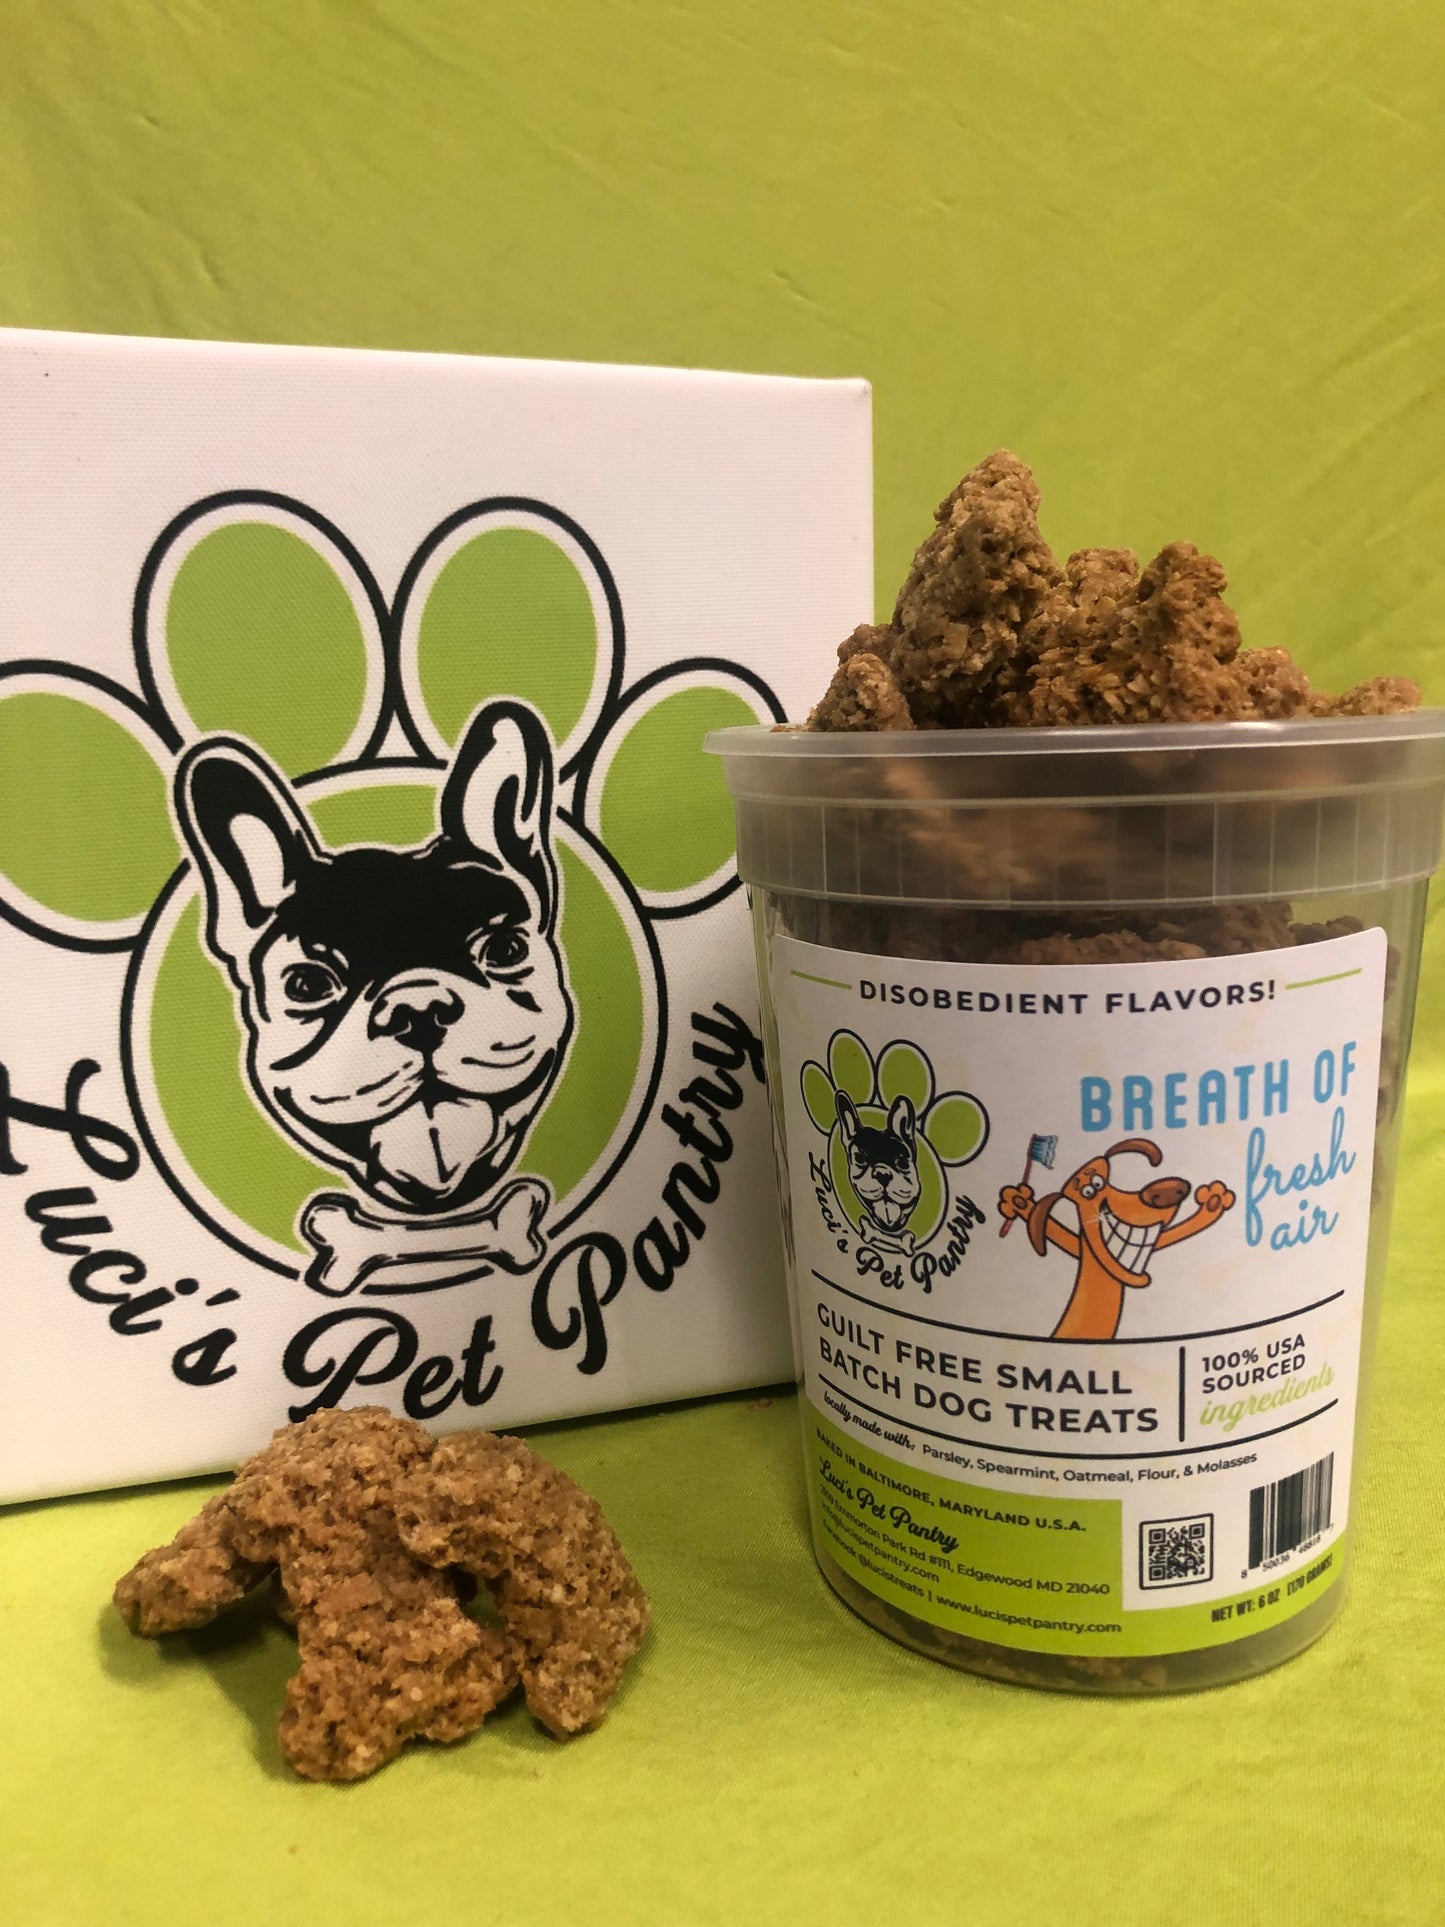 Breath of Fresh Air - All Natural "Spearmint & Parsley" Dog & Puppy Treats - Disobedient Tub of Biscuits